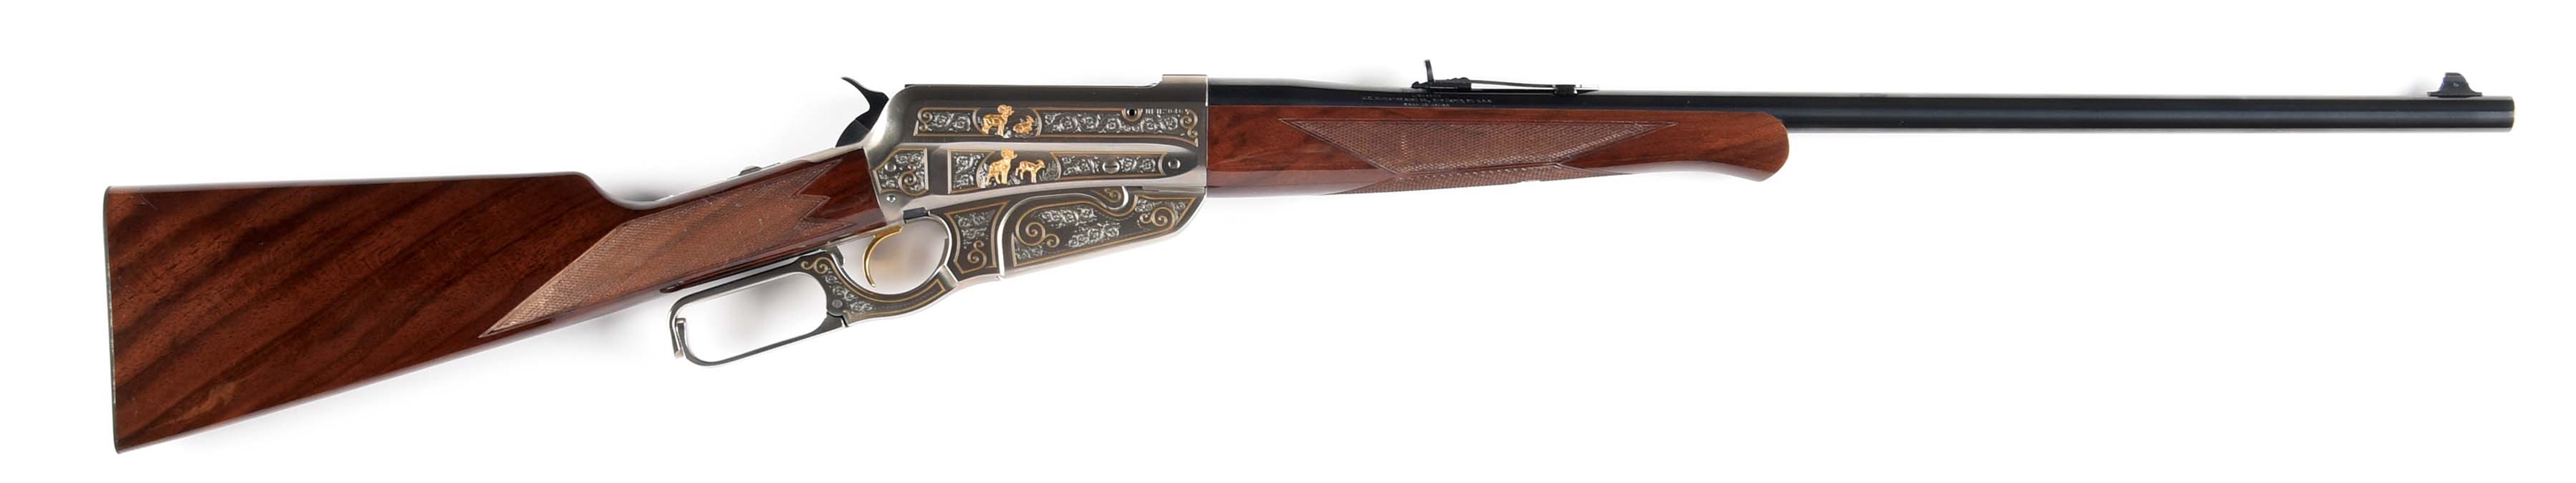 (M) MIB WINCHESTER HIGH GRADE MODEL 1895 LEVER ACTION RIFLE.